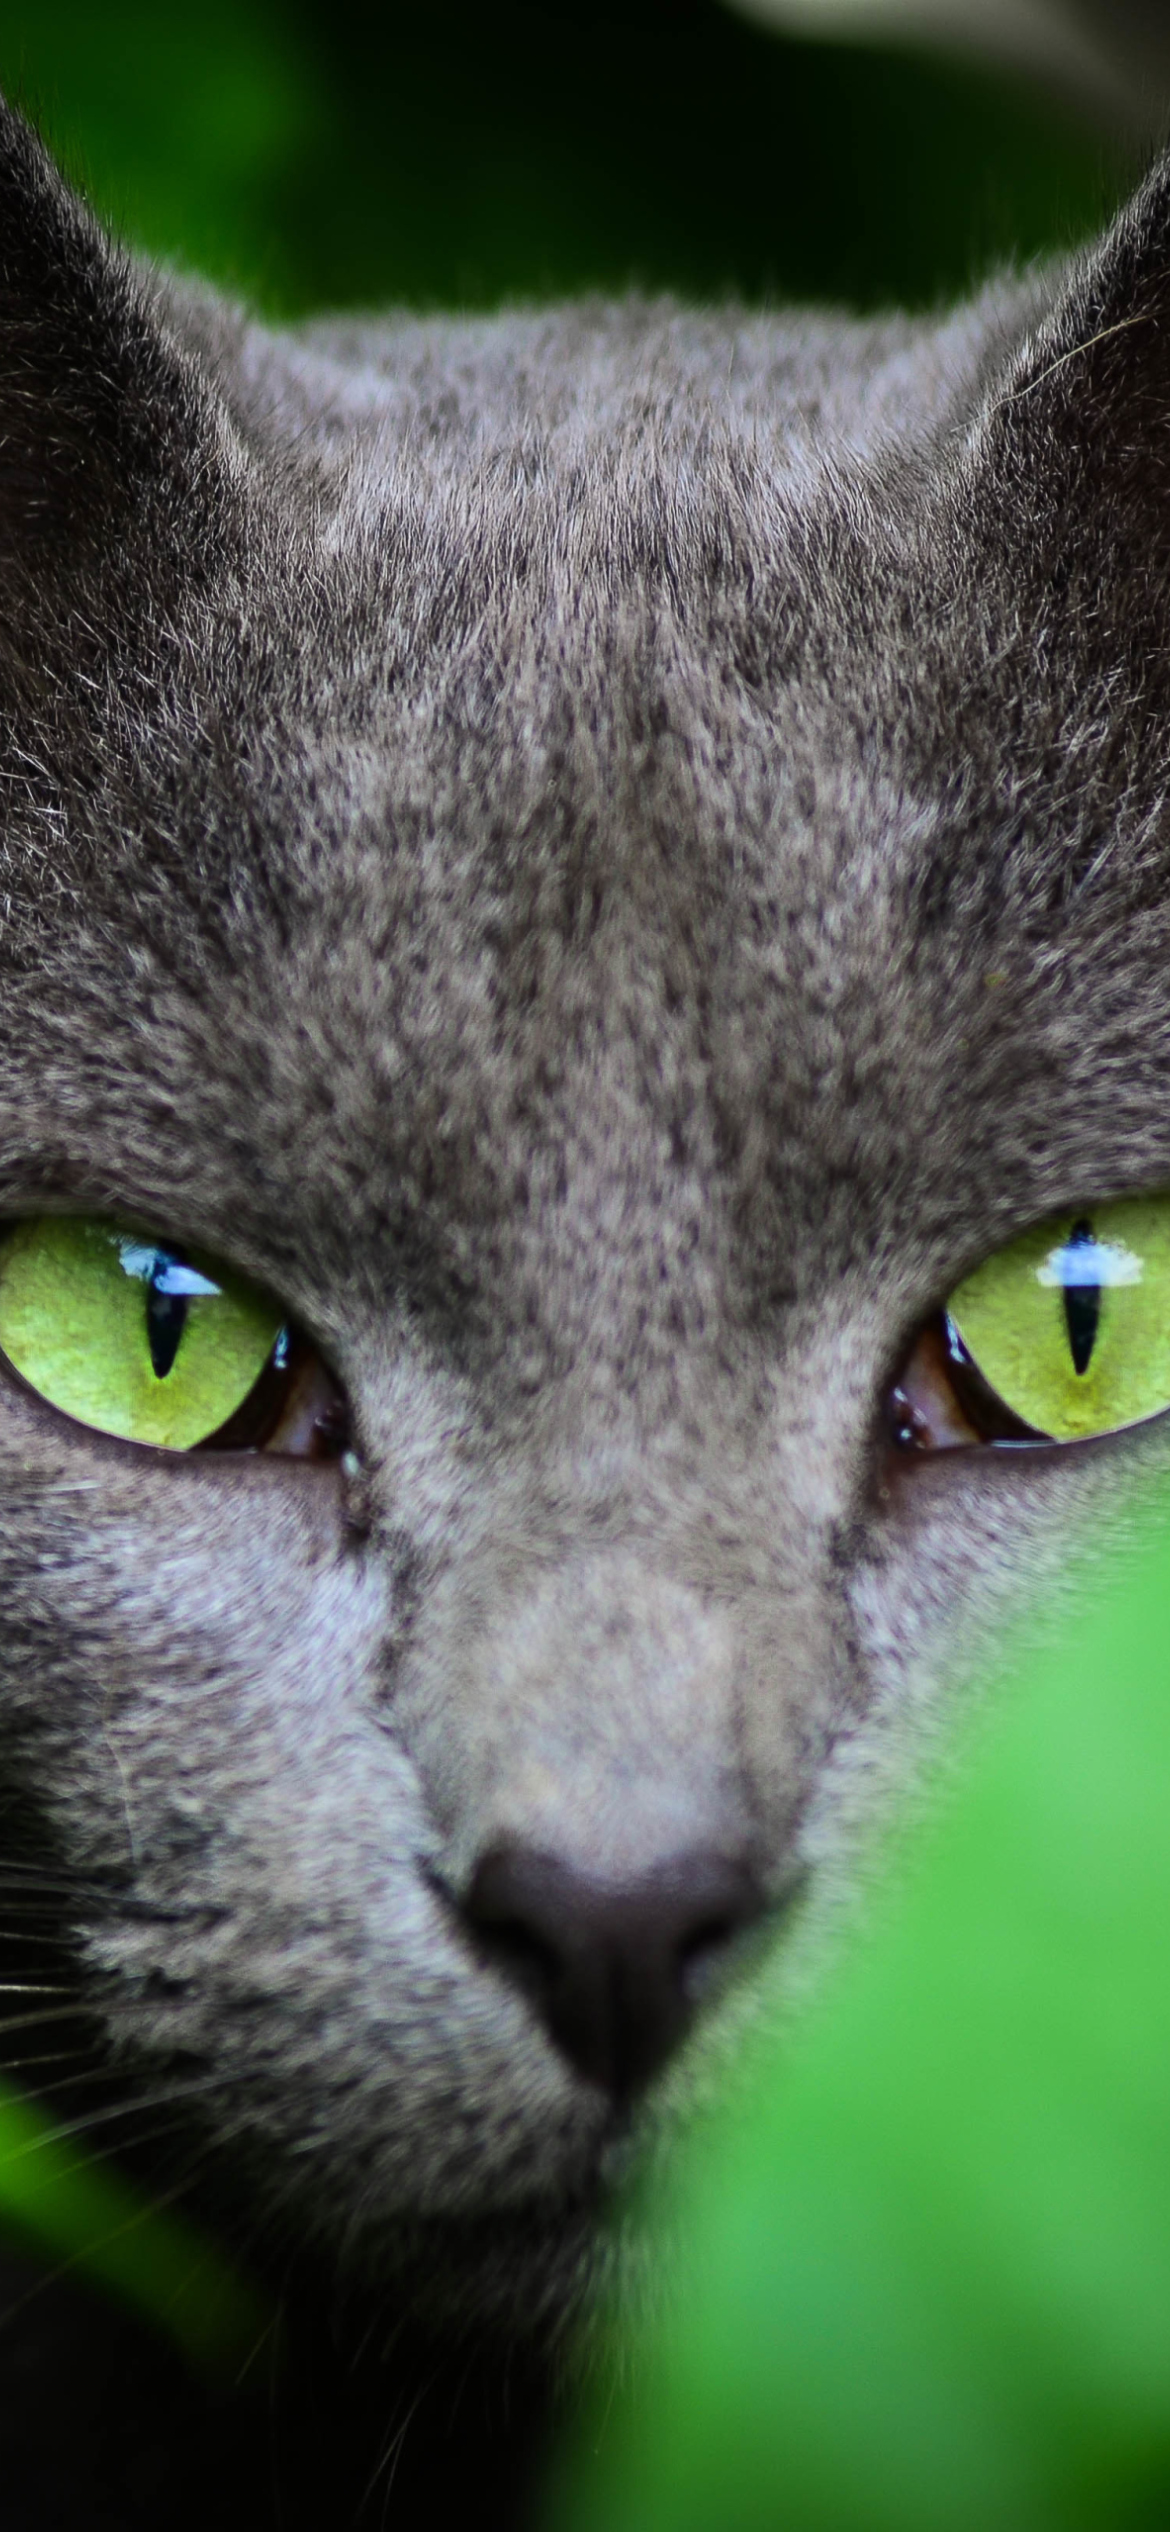 Cat With Green Eyes wallpaper 1170x2532